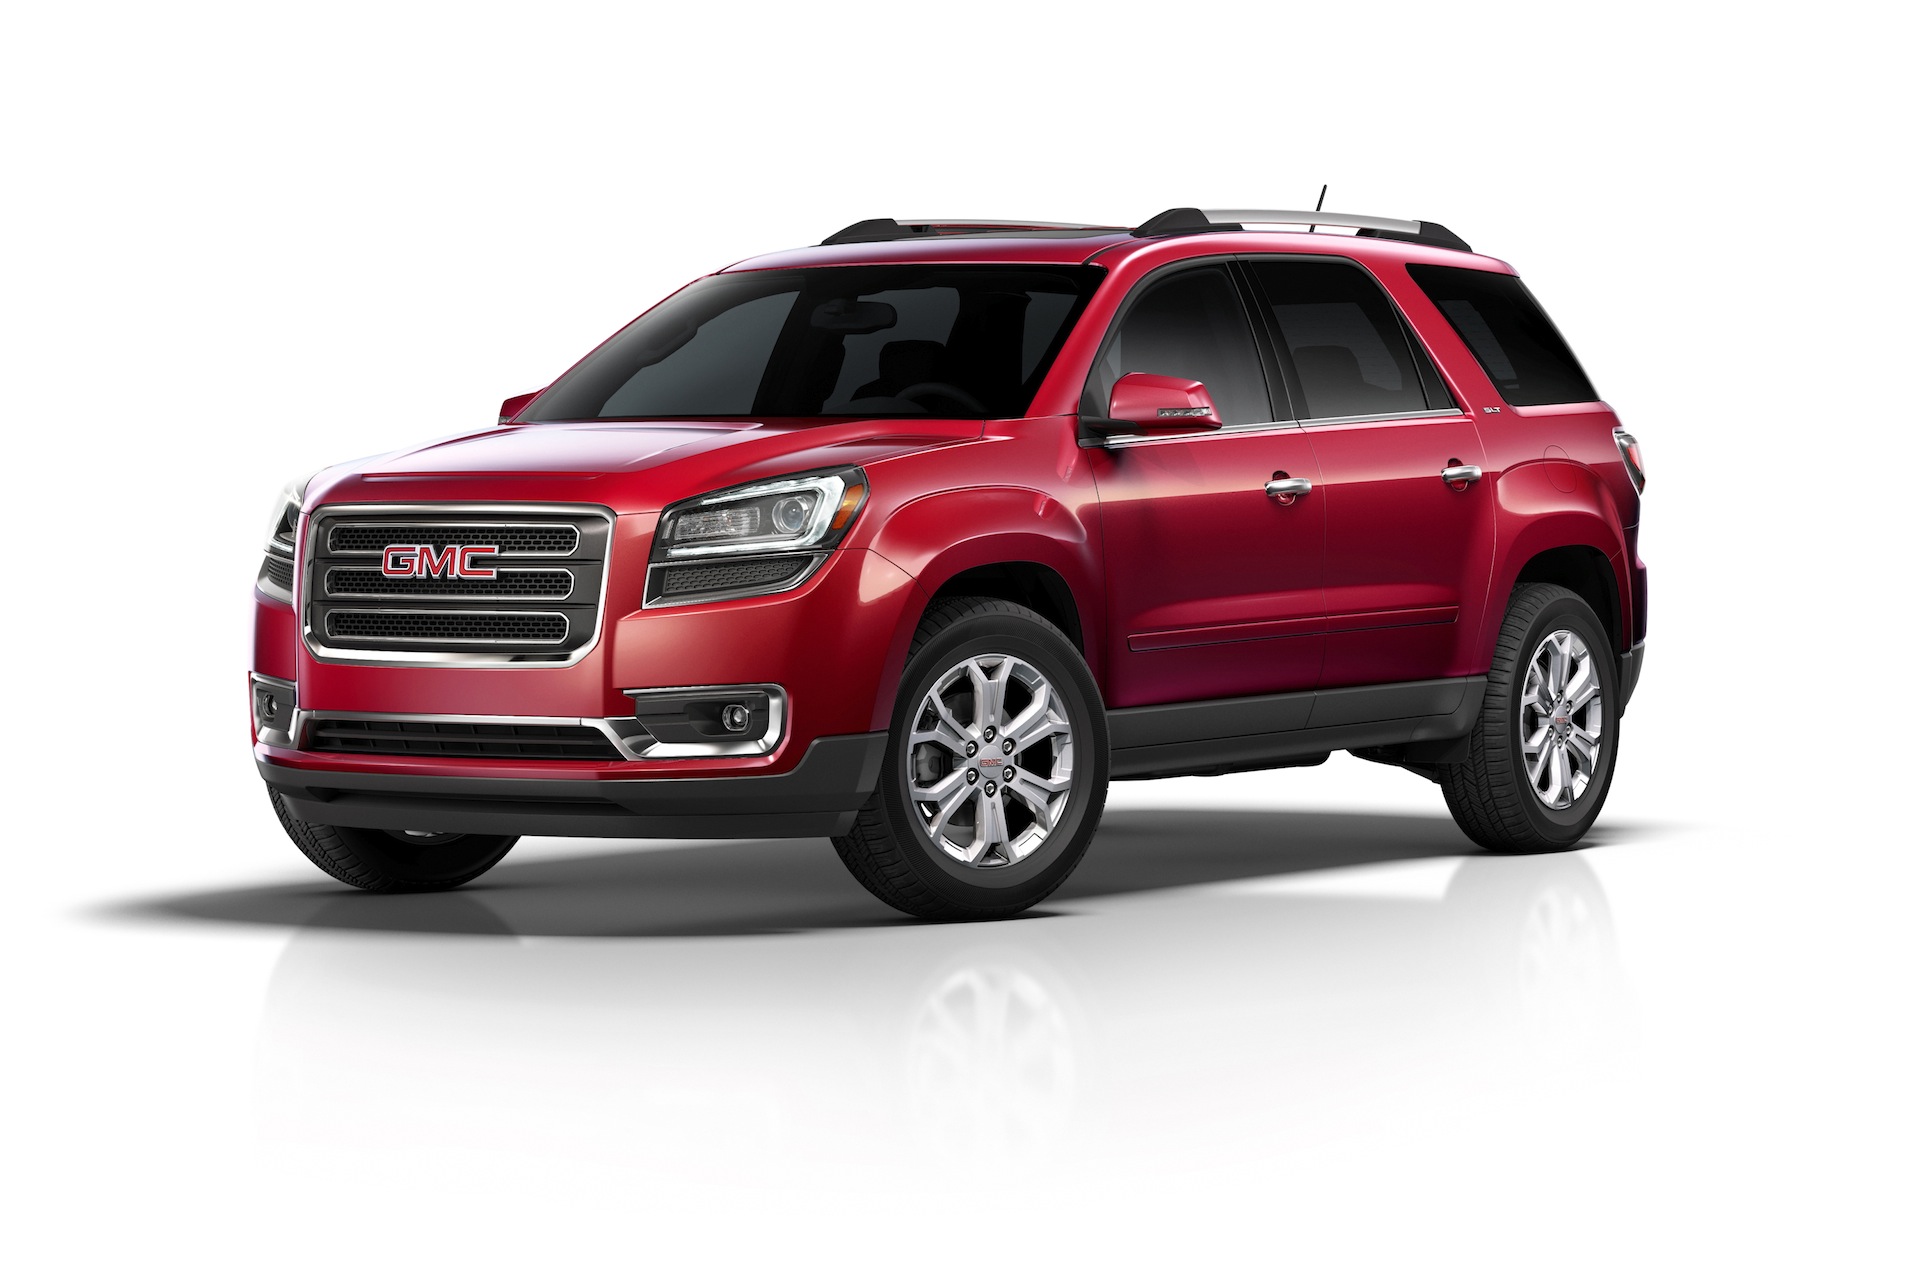 2014 Gmc Acadia Review Ratings Specs Prices And Photos